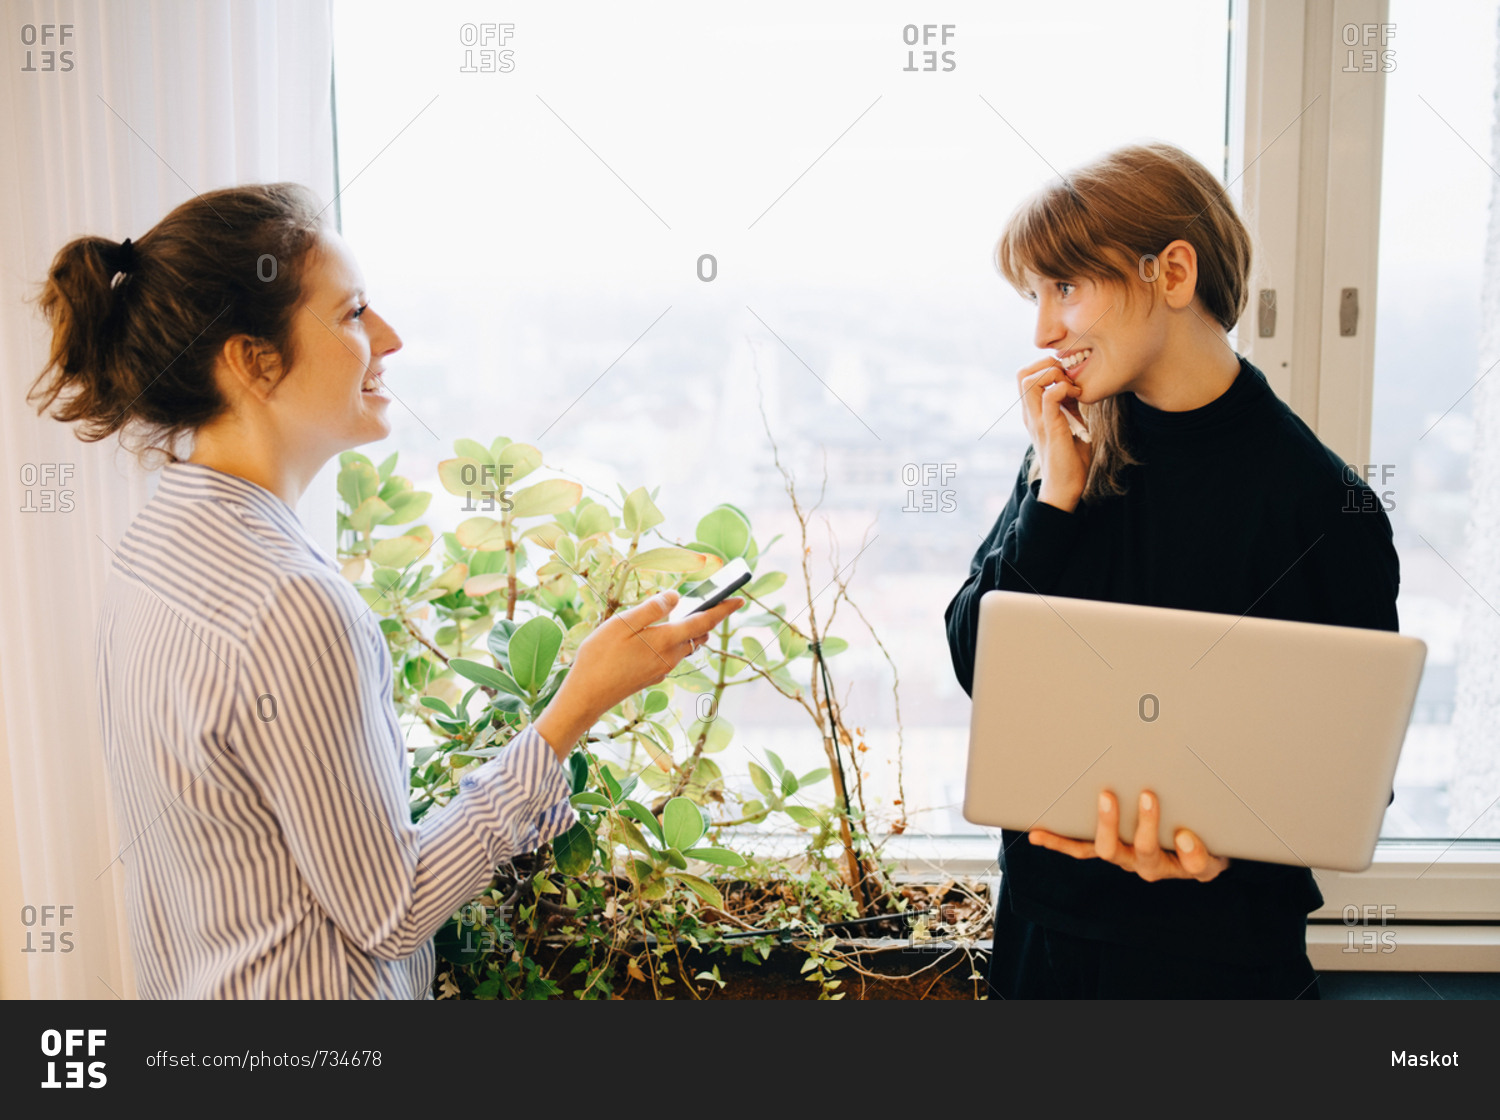 Smiling female colleagues standing with technologies by window at creative office